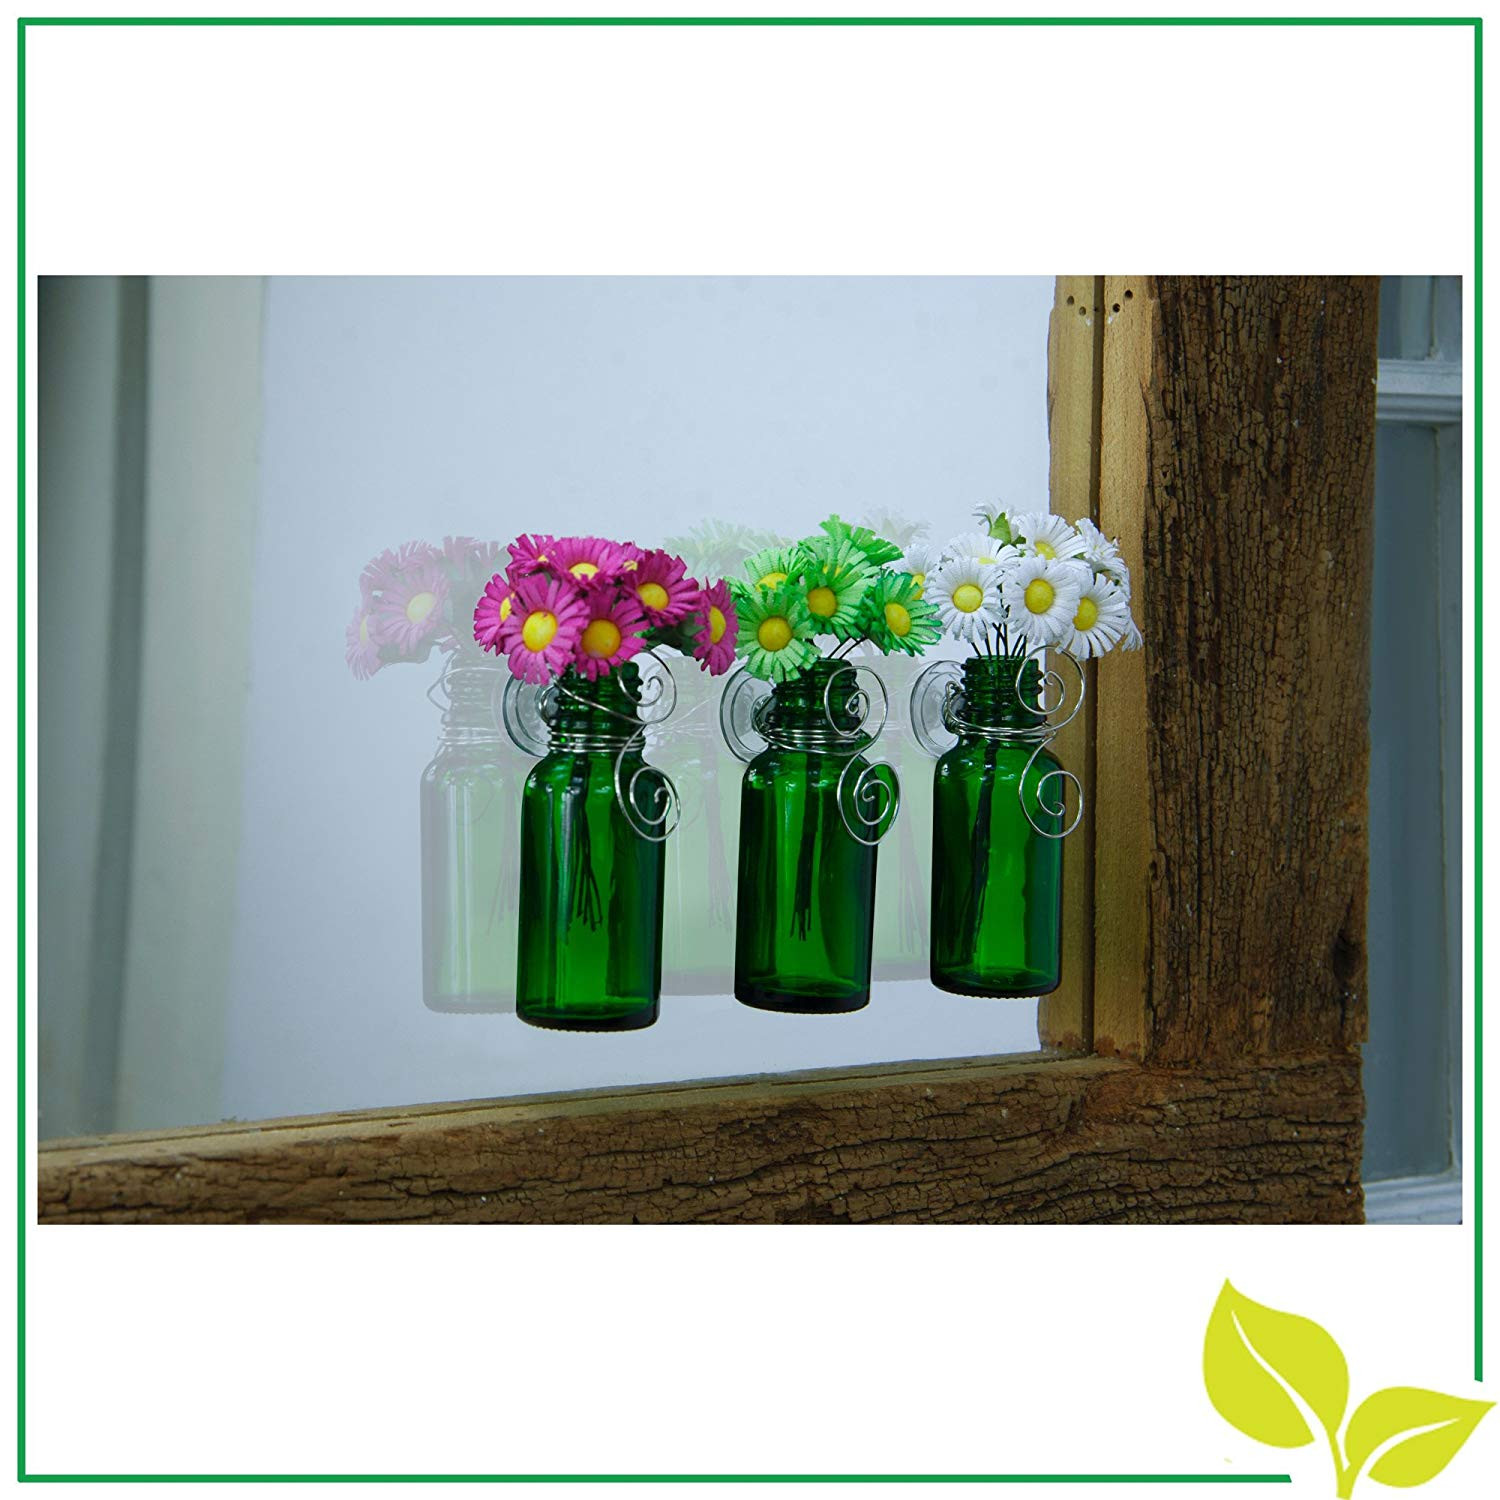 14 Best Wall Hanging Bud Vase 2024 free download wall hanging bud vase of amazon com vazzini mini vase bouquet suction cup bud bottle inside amazon com vazzini mini vase bouquet suction cup bud bottle holder with flowers decorative for win